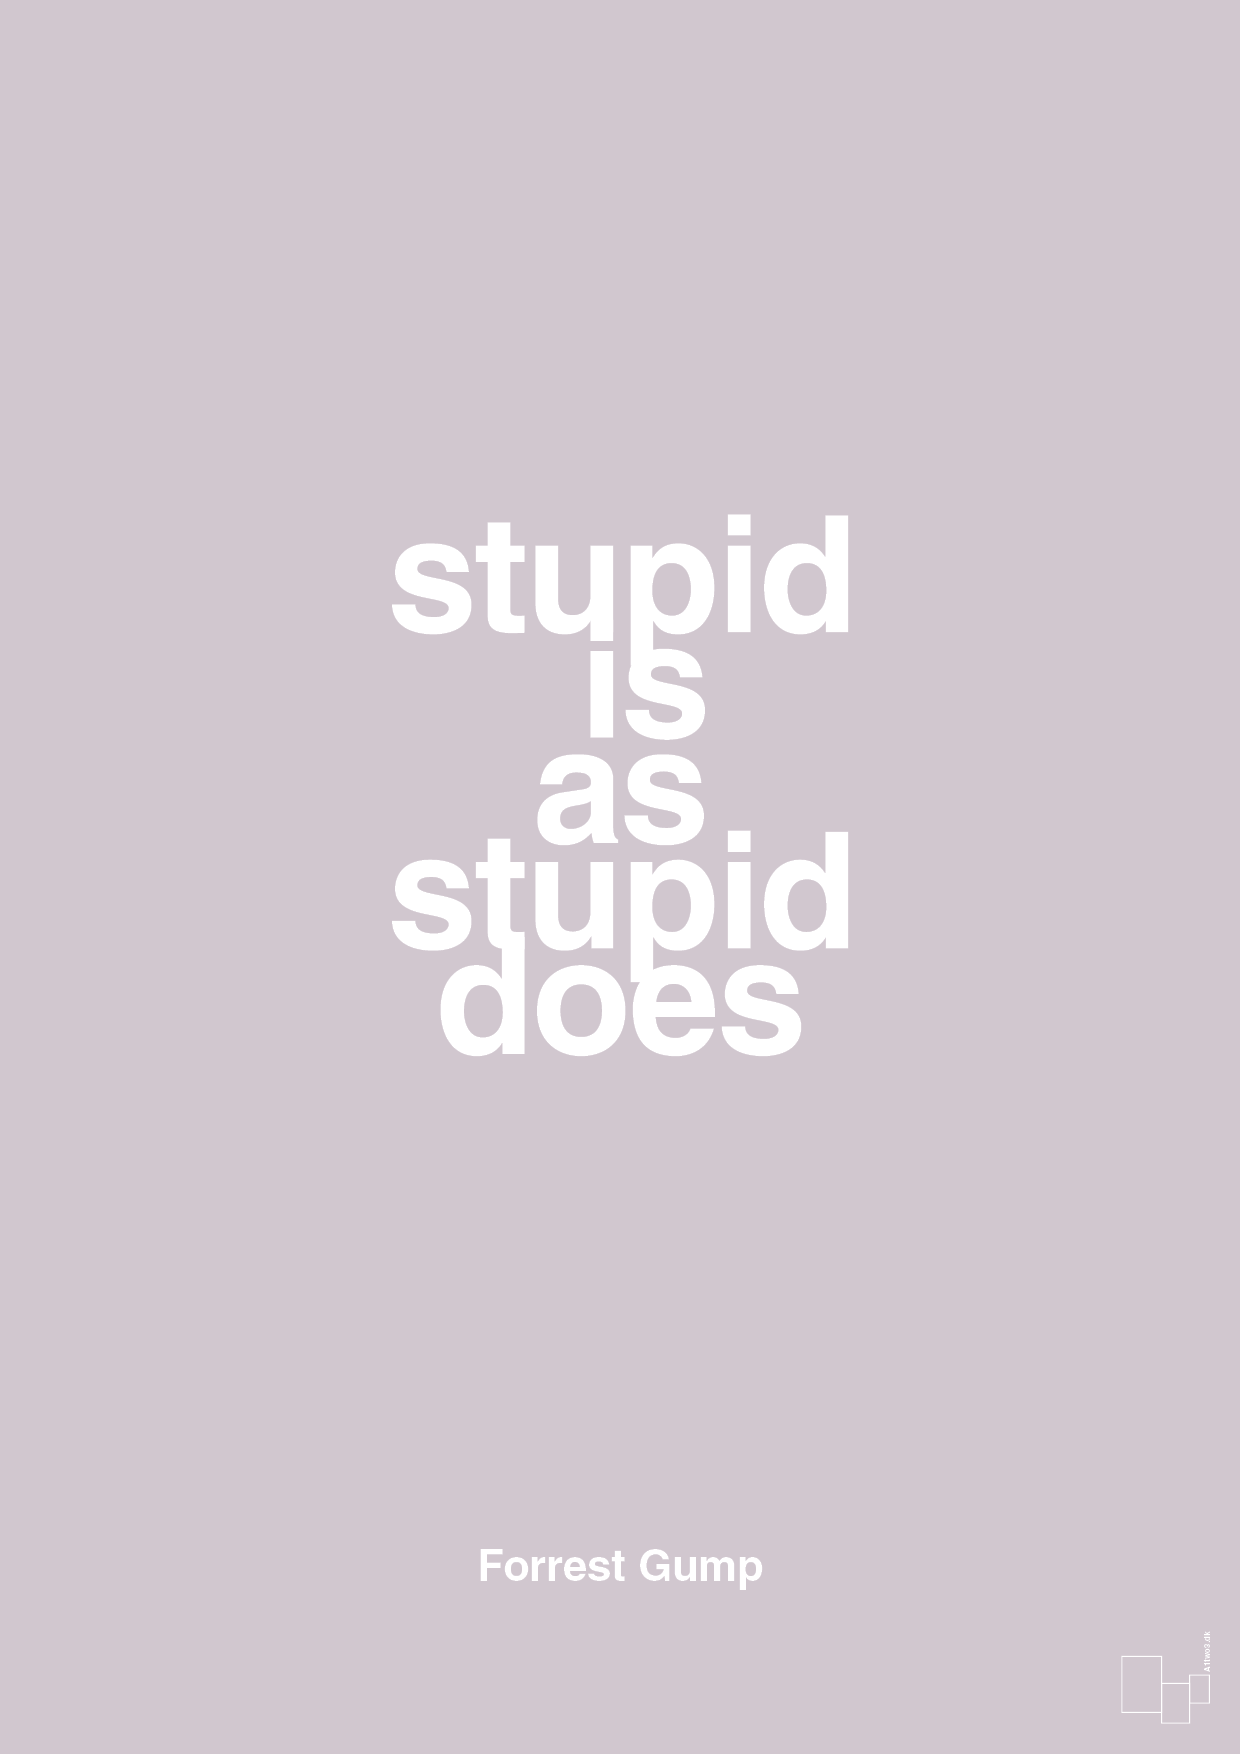 stupid is as stupid does - Plakat med Citater i Dusty Lilac